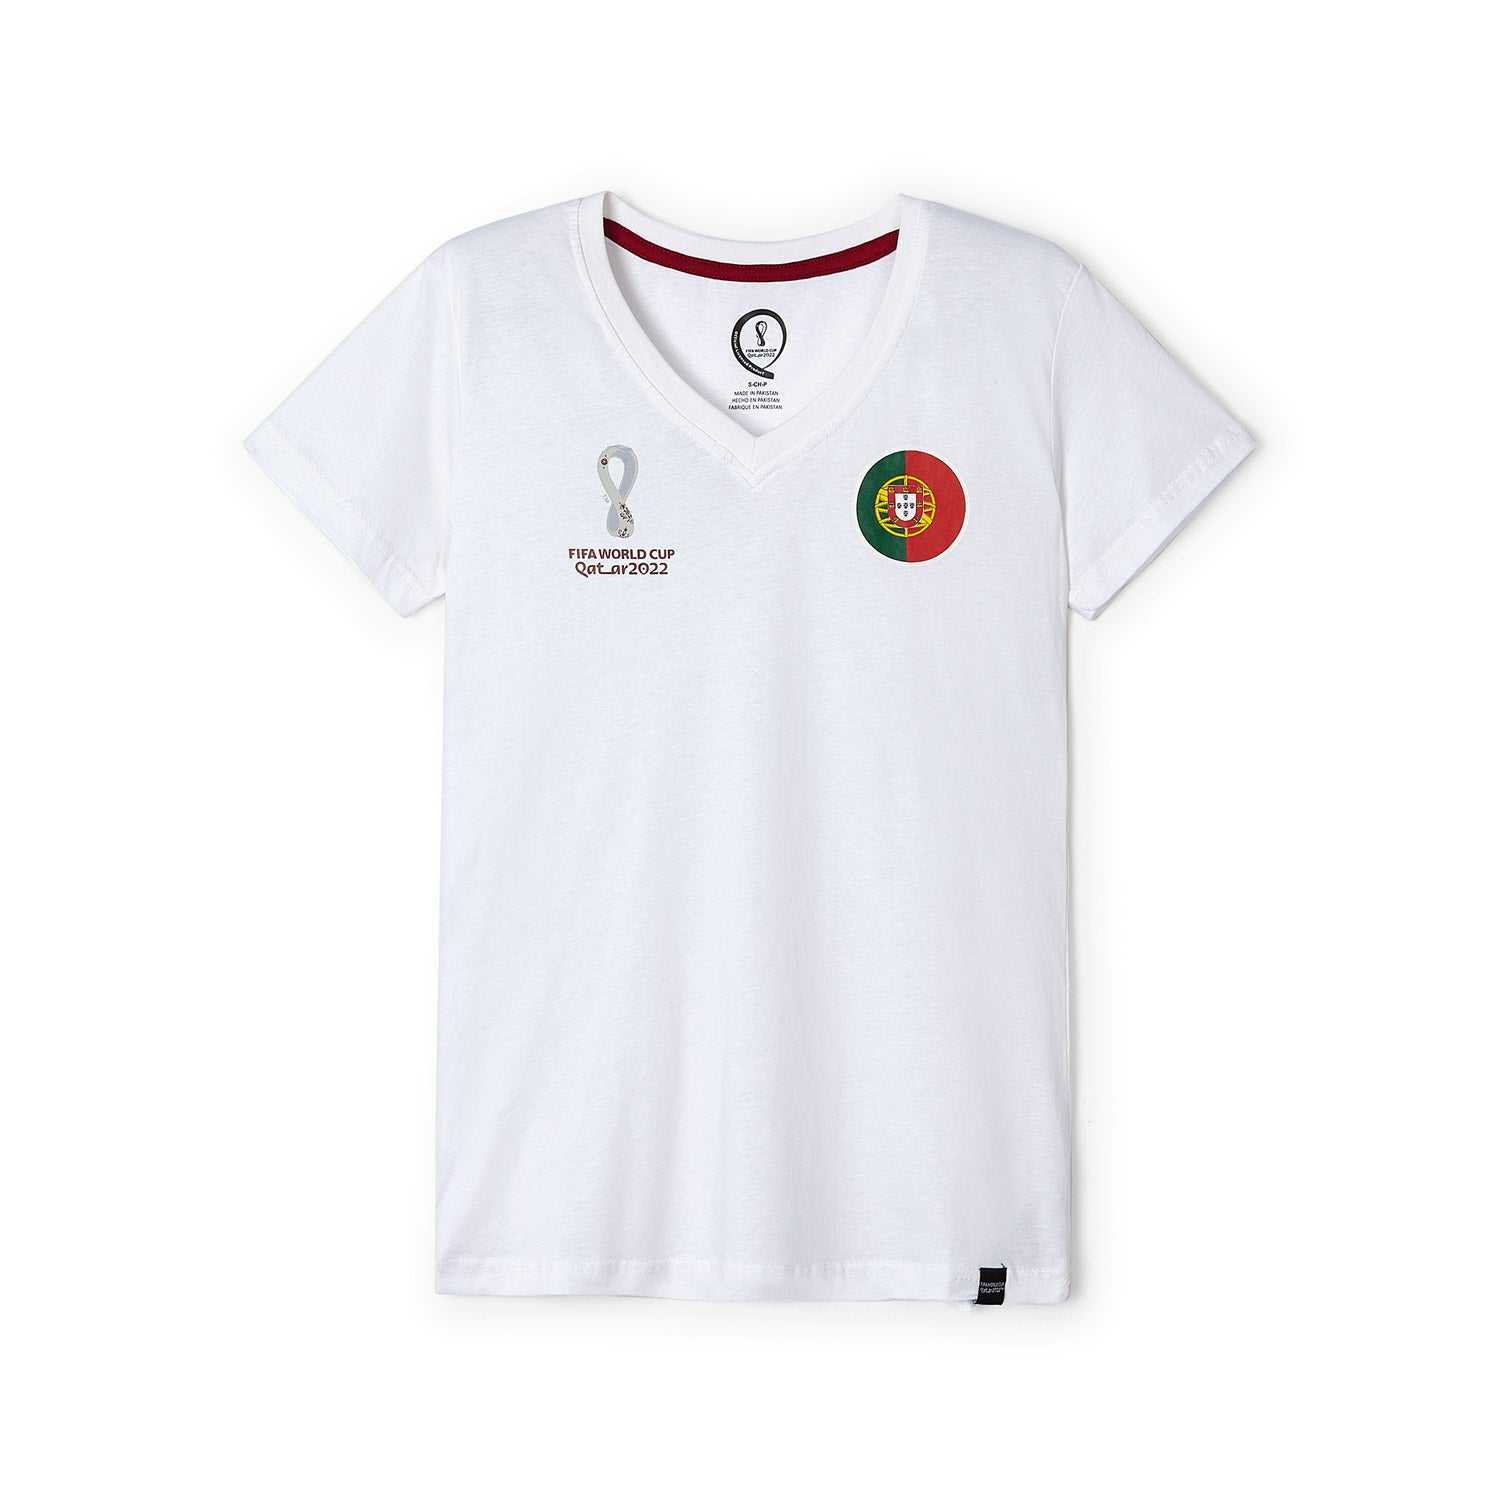 2022 World Cup Portugal White T-Shirt - Womens